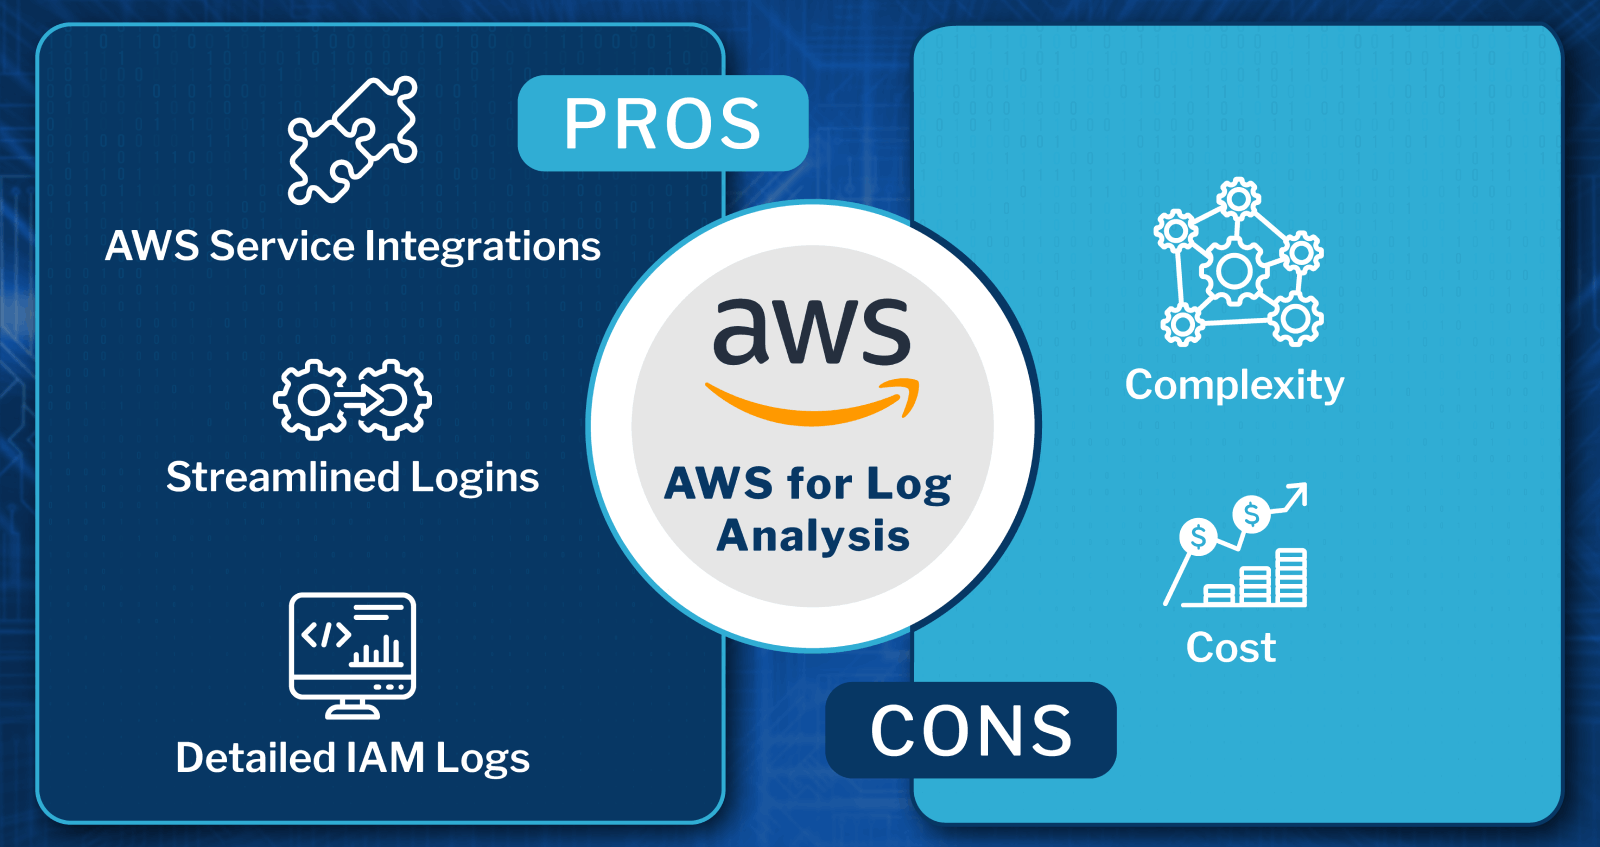 AWS for Log Analysis Pros and Cons